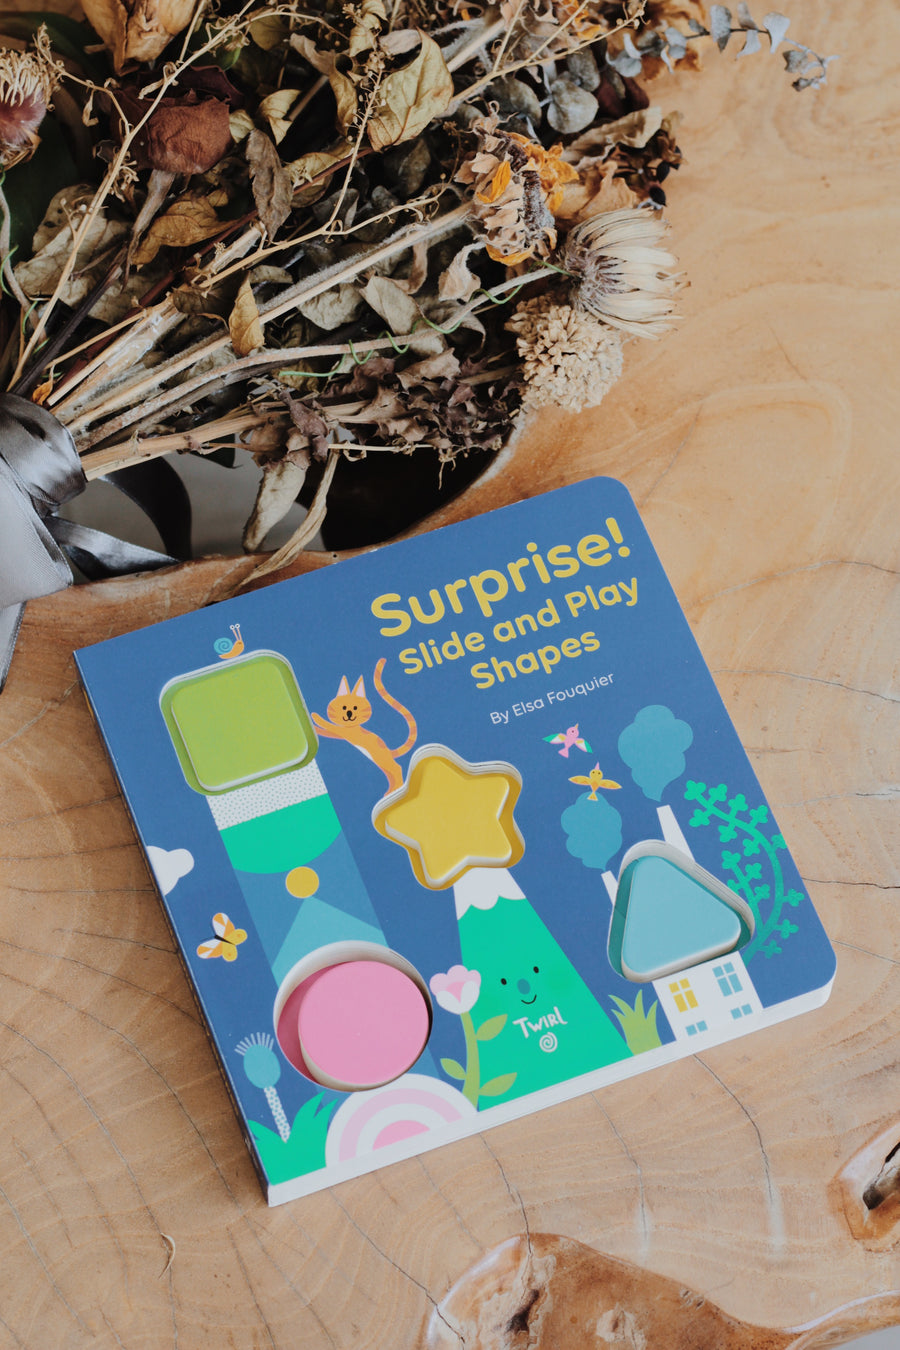 SURPRISE! Slide and Play Shapes